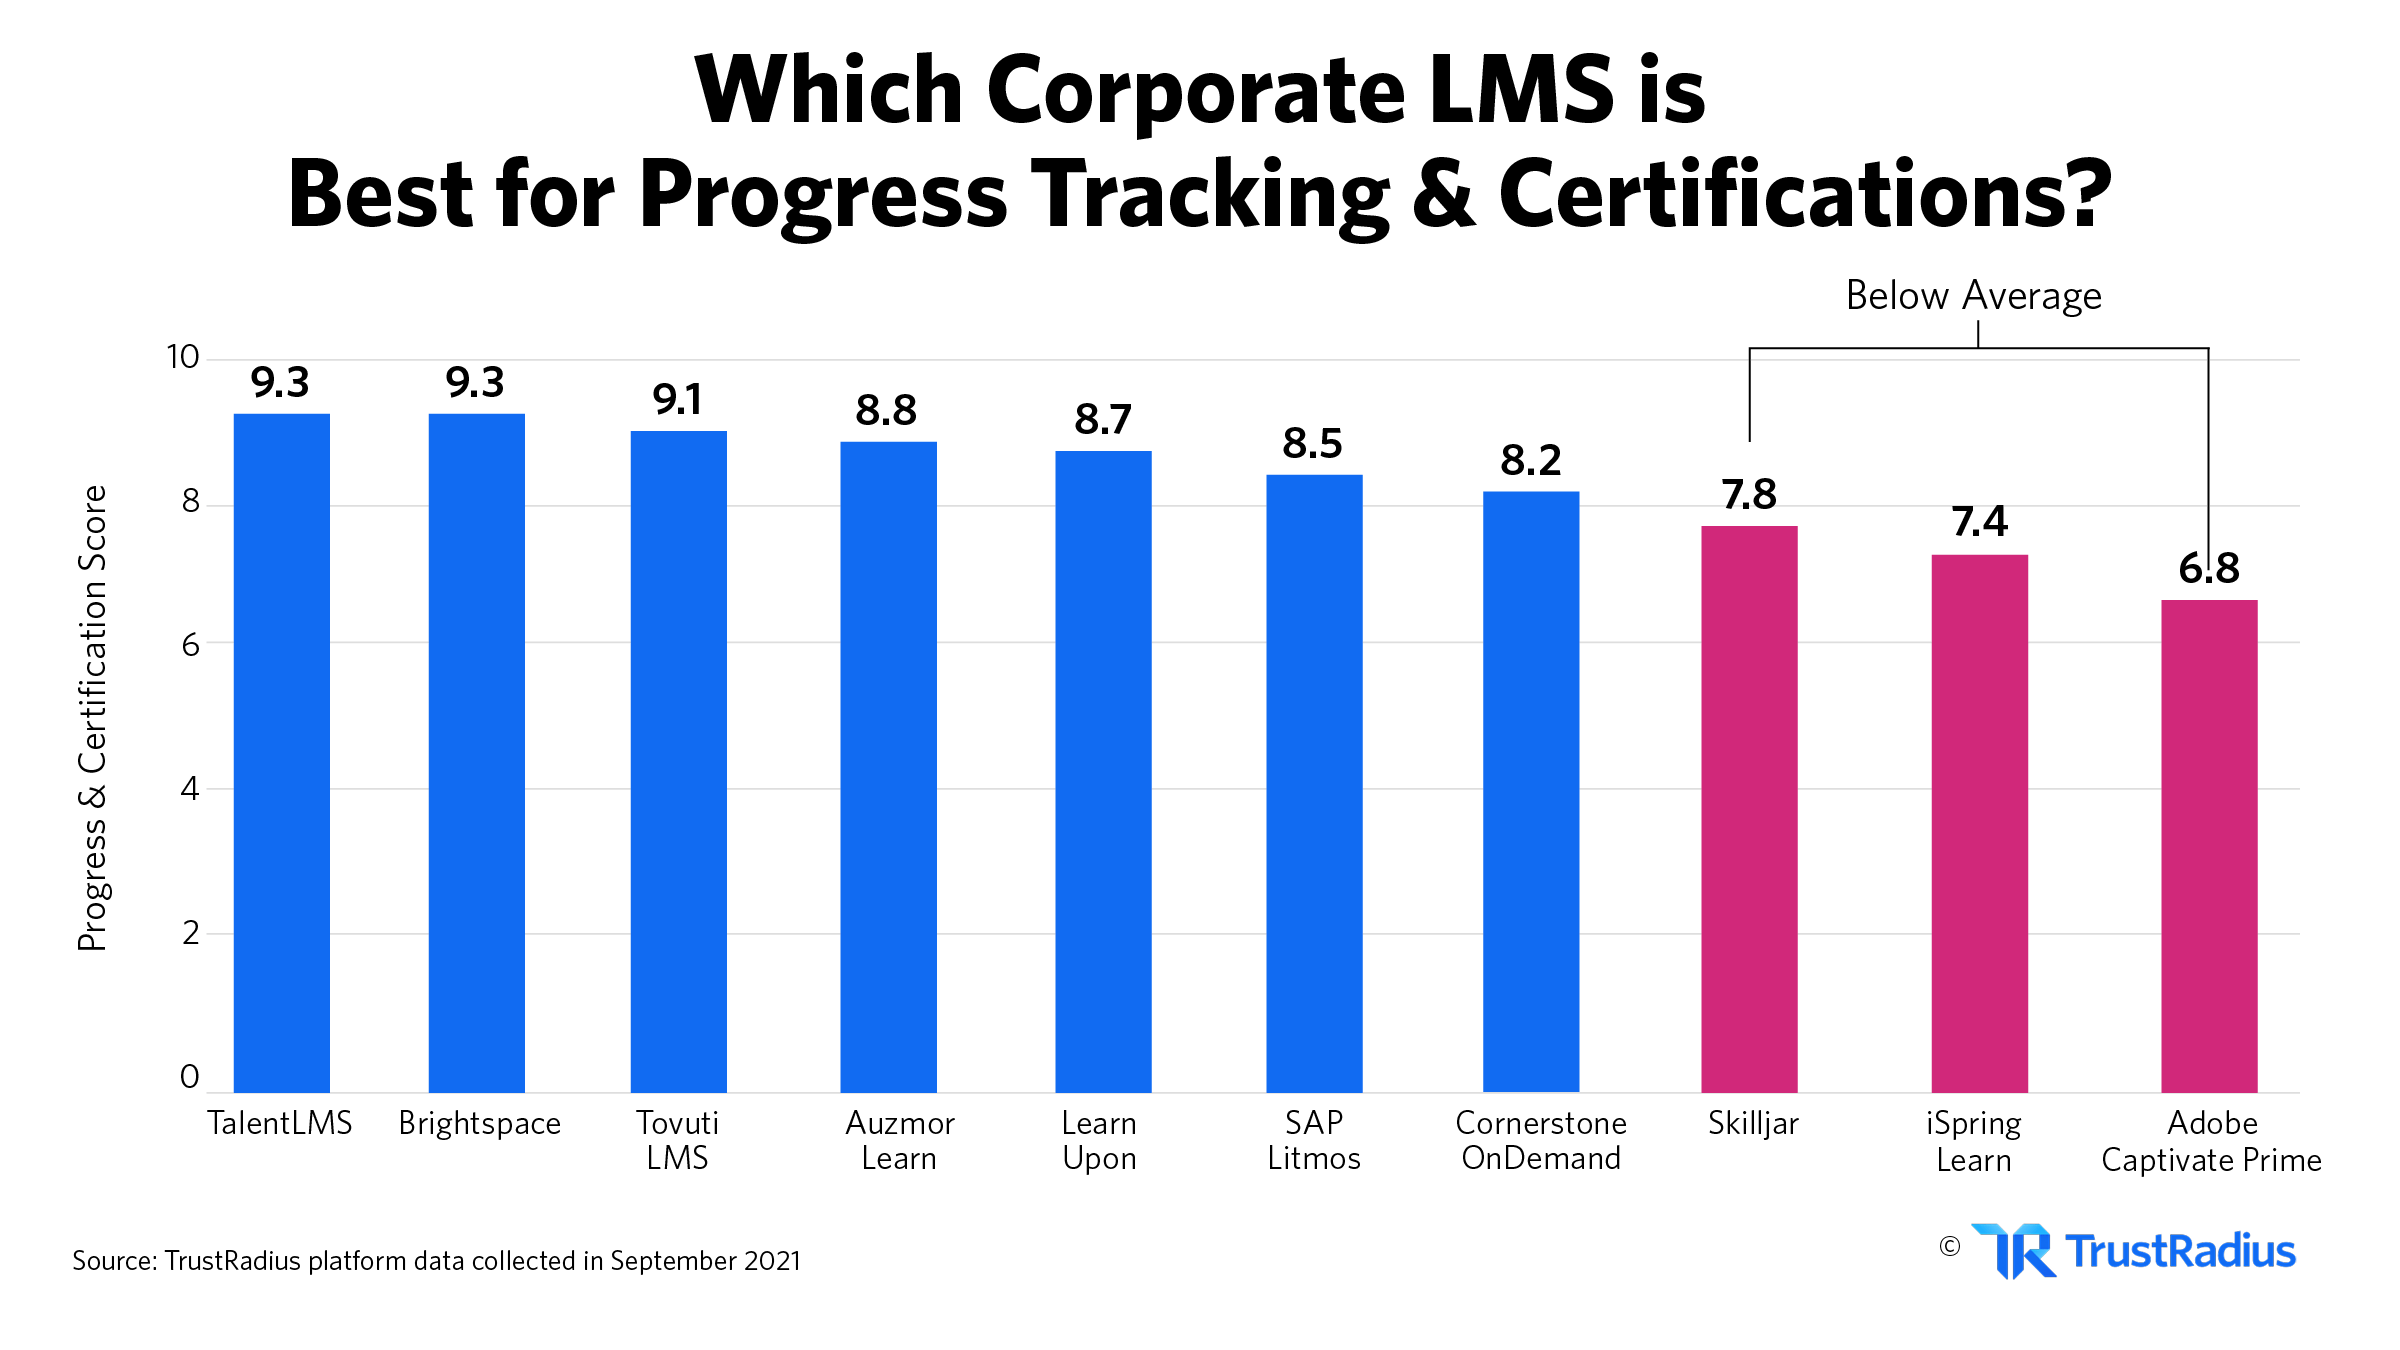 which corporate lms has the best progress tracking and certifications in 2021